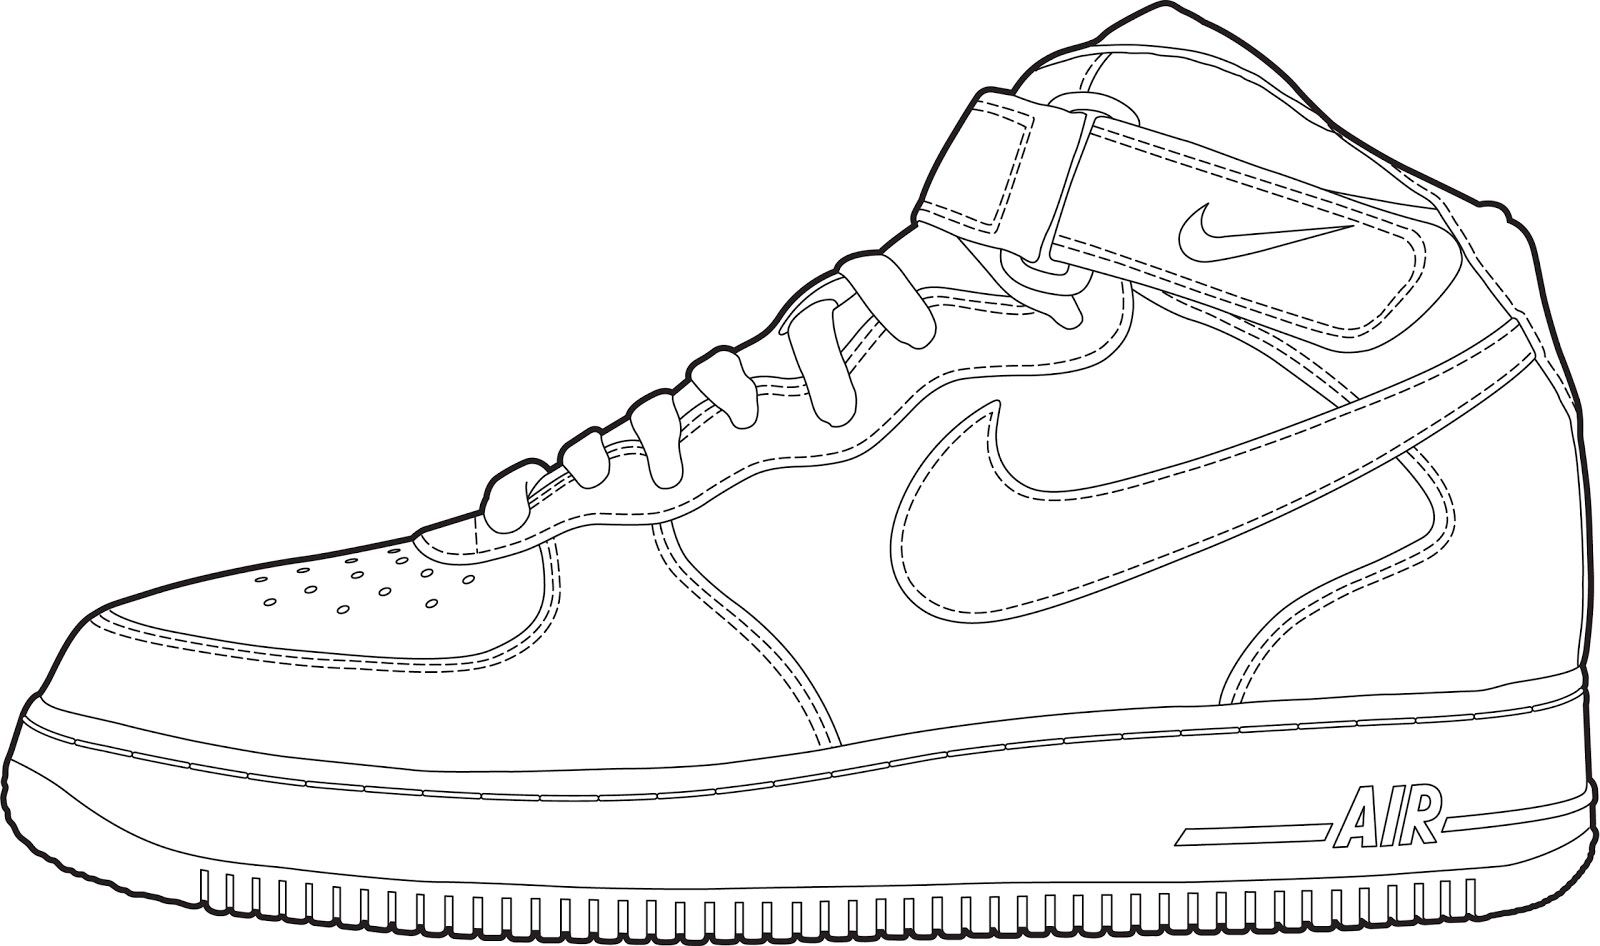 Coloring Pages : Coloring Pages Outstanding Sneaker Page Air ...